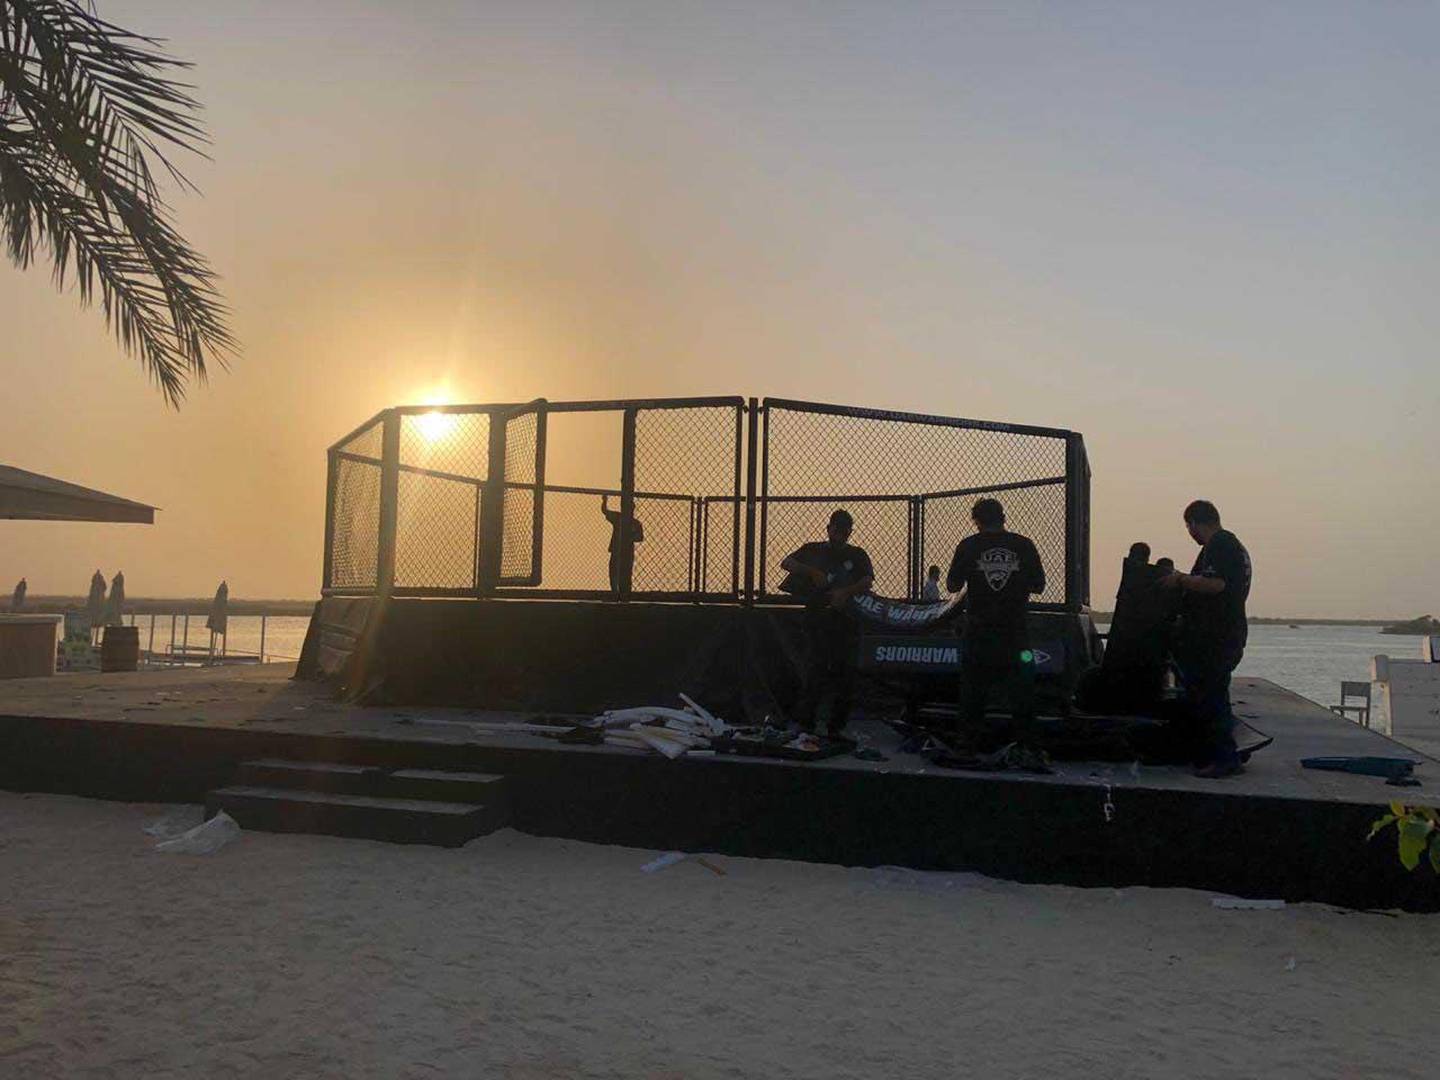 Yas Island pic posted by Dana White on Twitter